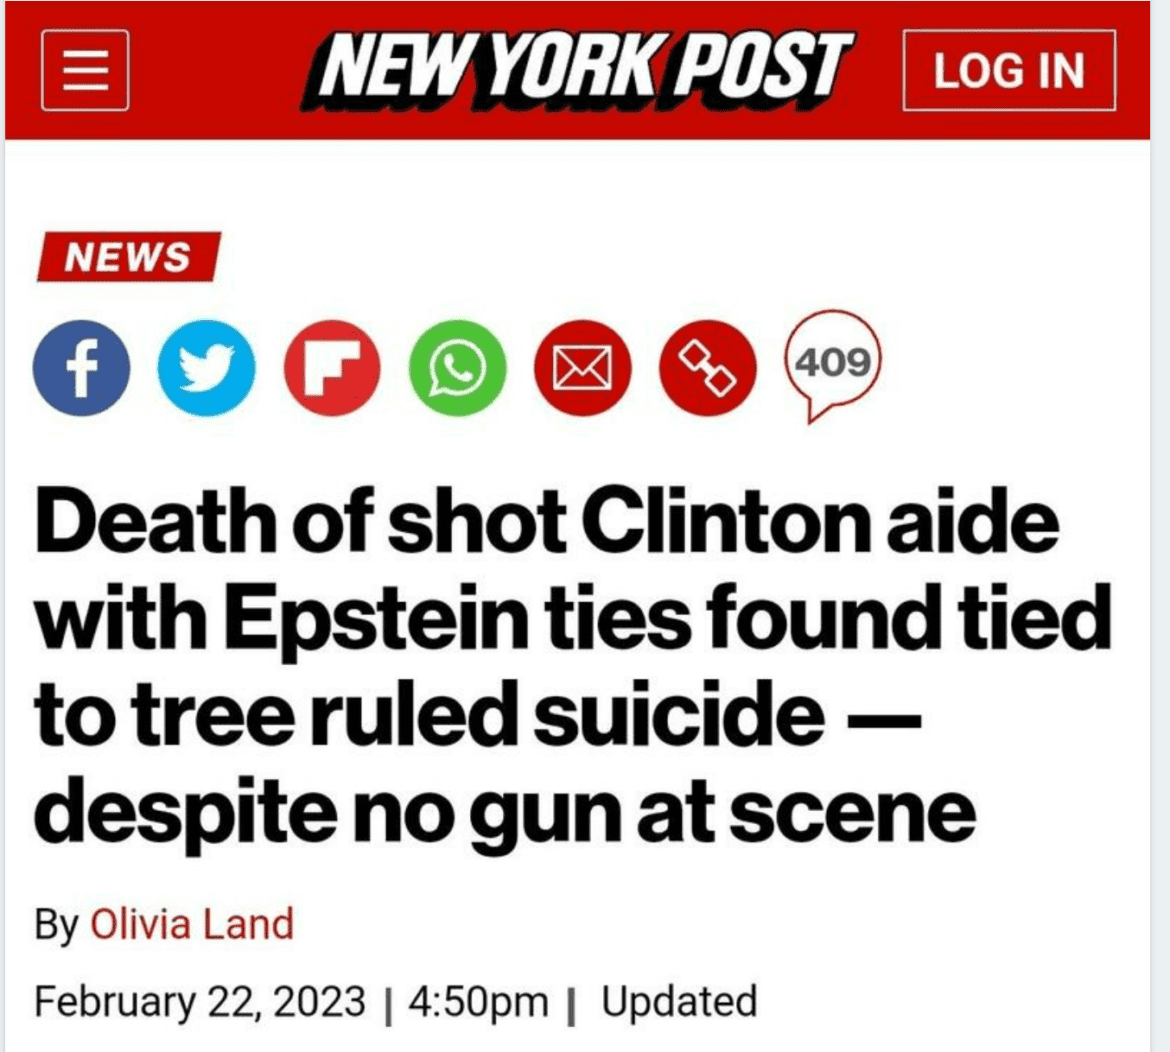 Another Strange Clinton Suicide